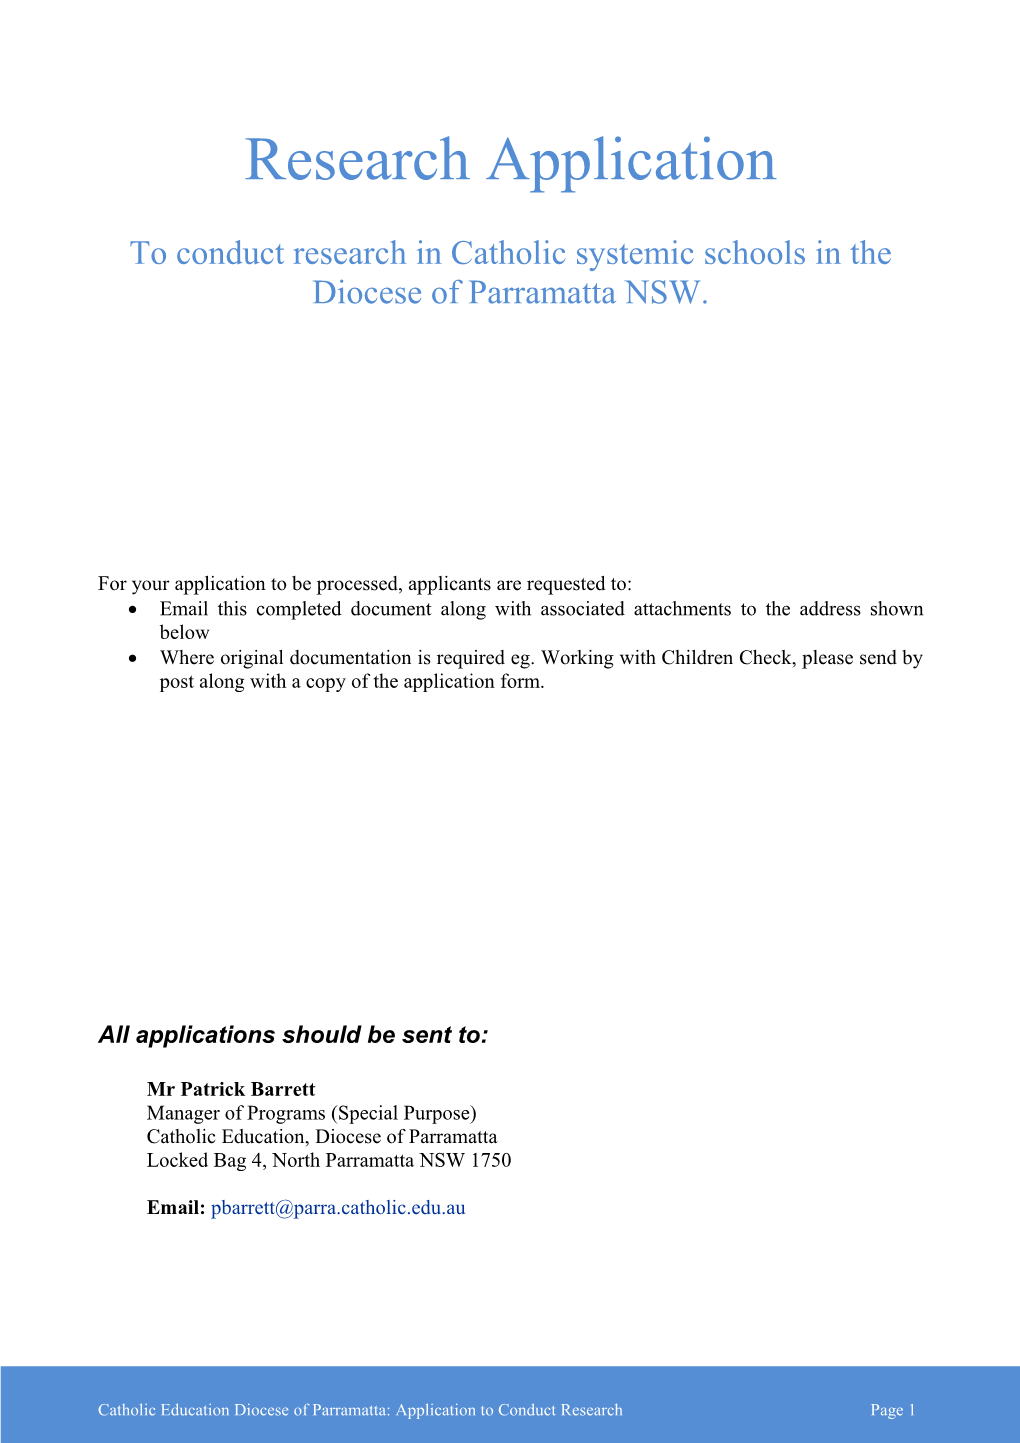 To Conduct Research in Catholic Systemic Schools in the Diocese of Parramatta NSW